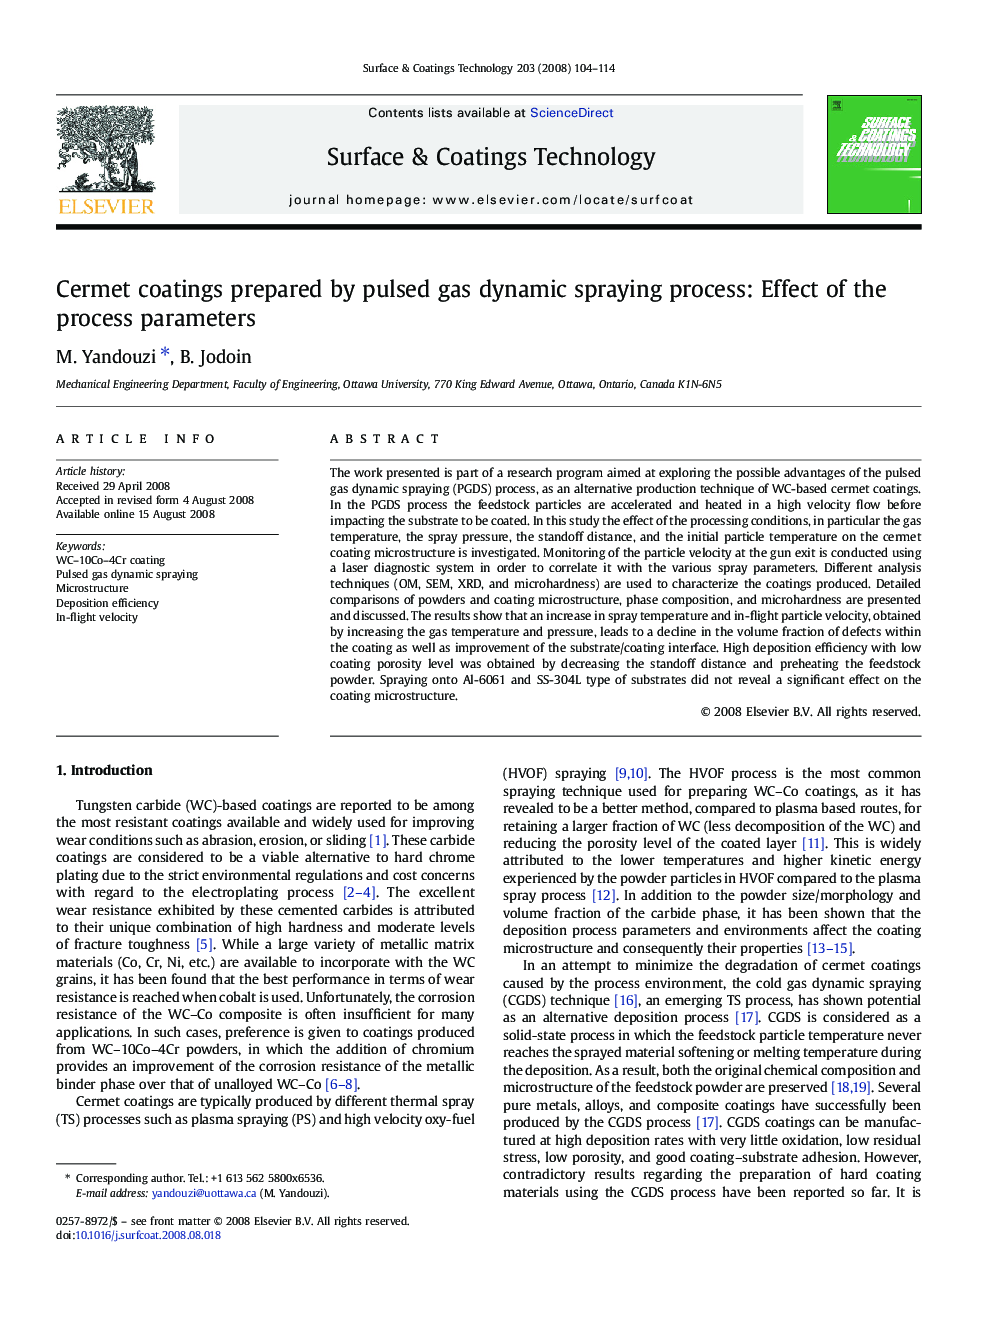 Cermet coatings prepared by pulsed gas dynamic spraying process: Effect of the process parameters